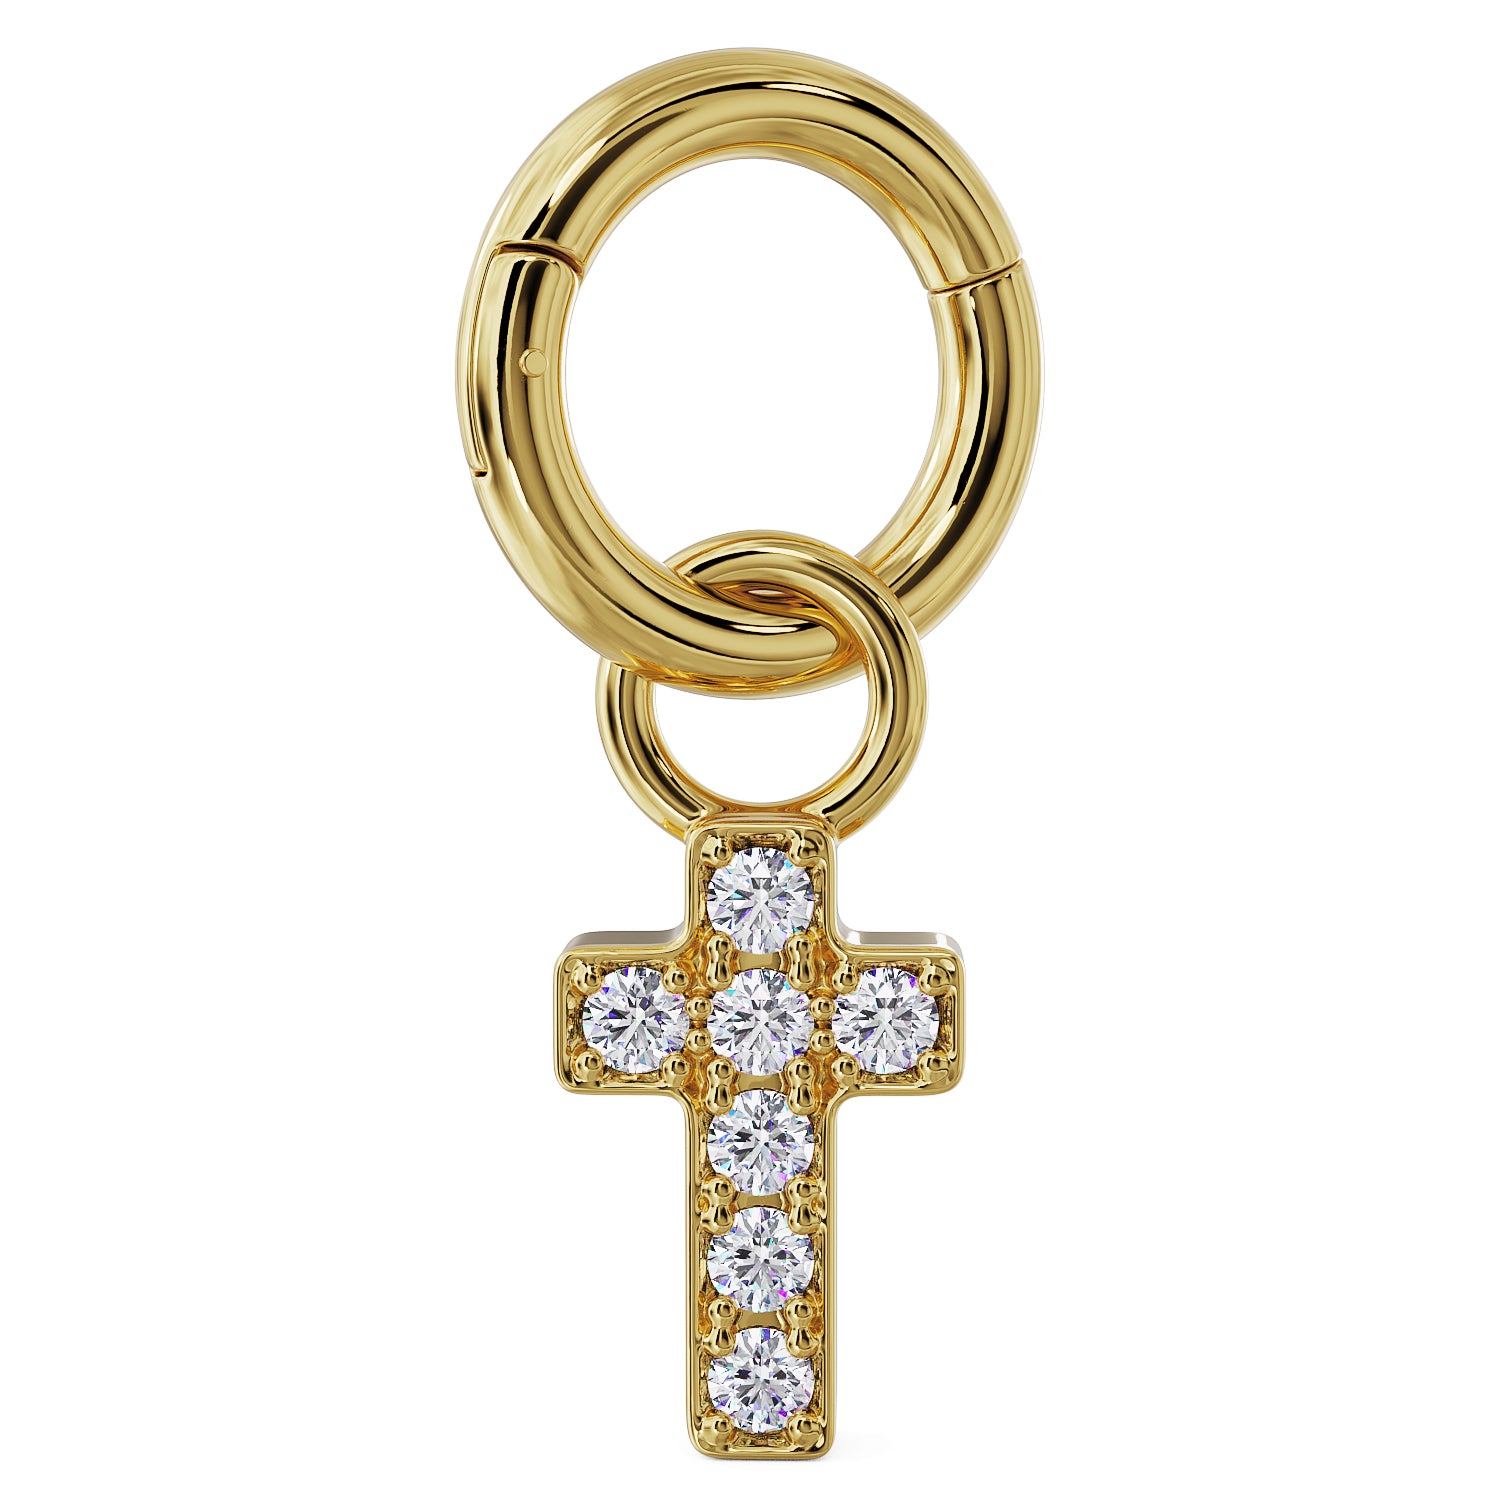 Clicker Ring & Cross Diamond Charm Accessory for Piercing Jewelry